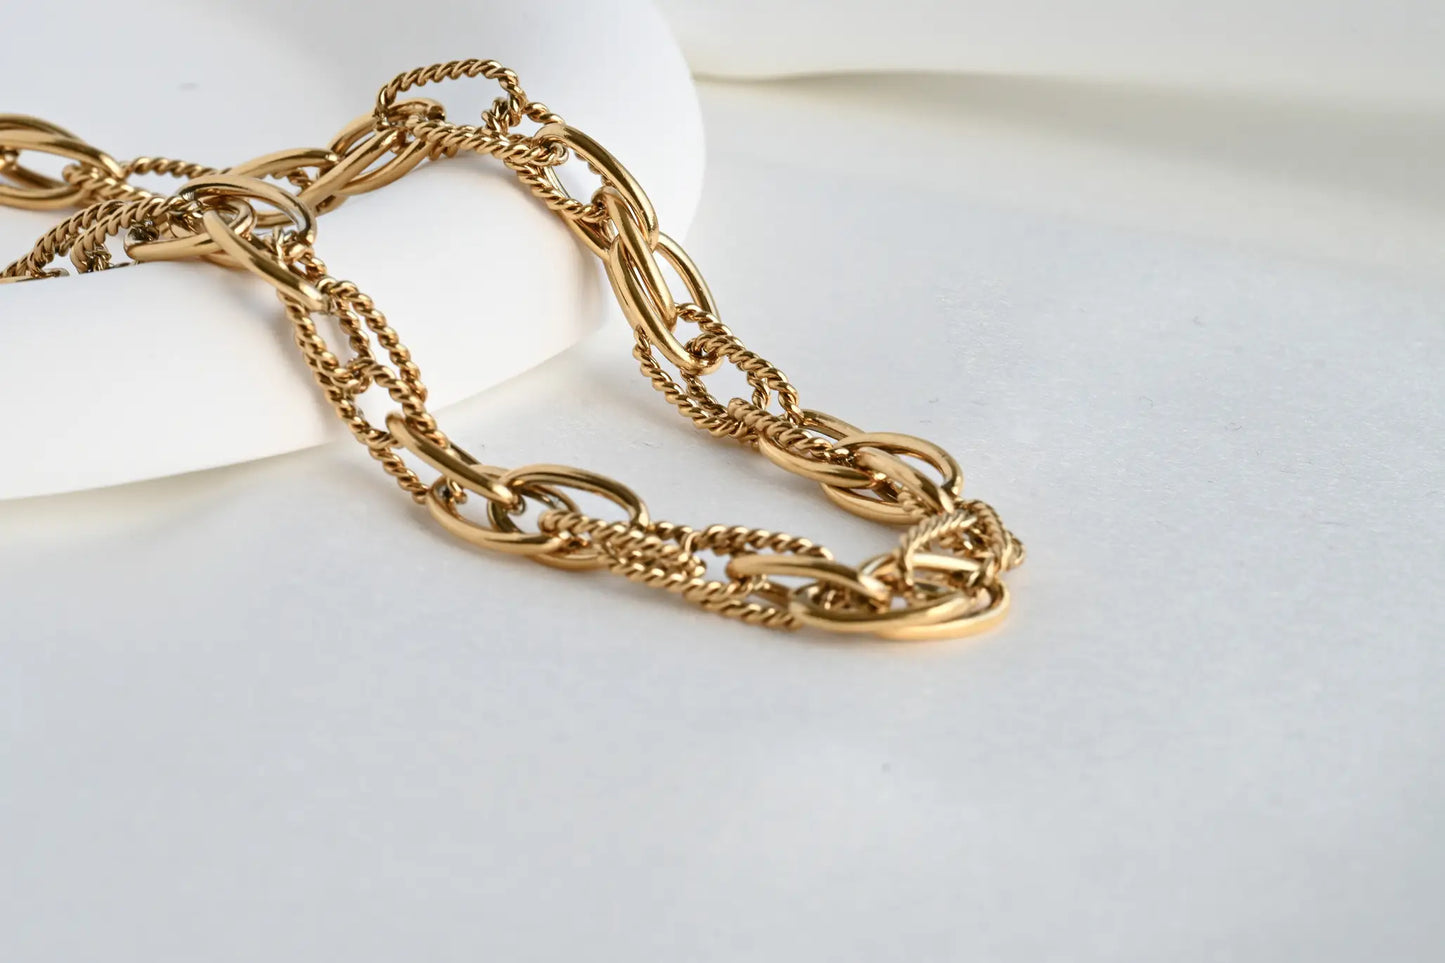 Dual Chain Necklace - Twist Link Chain Necklace